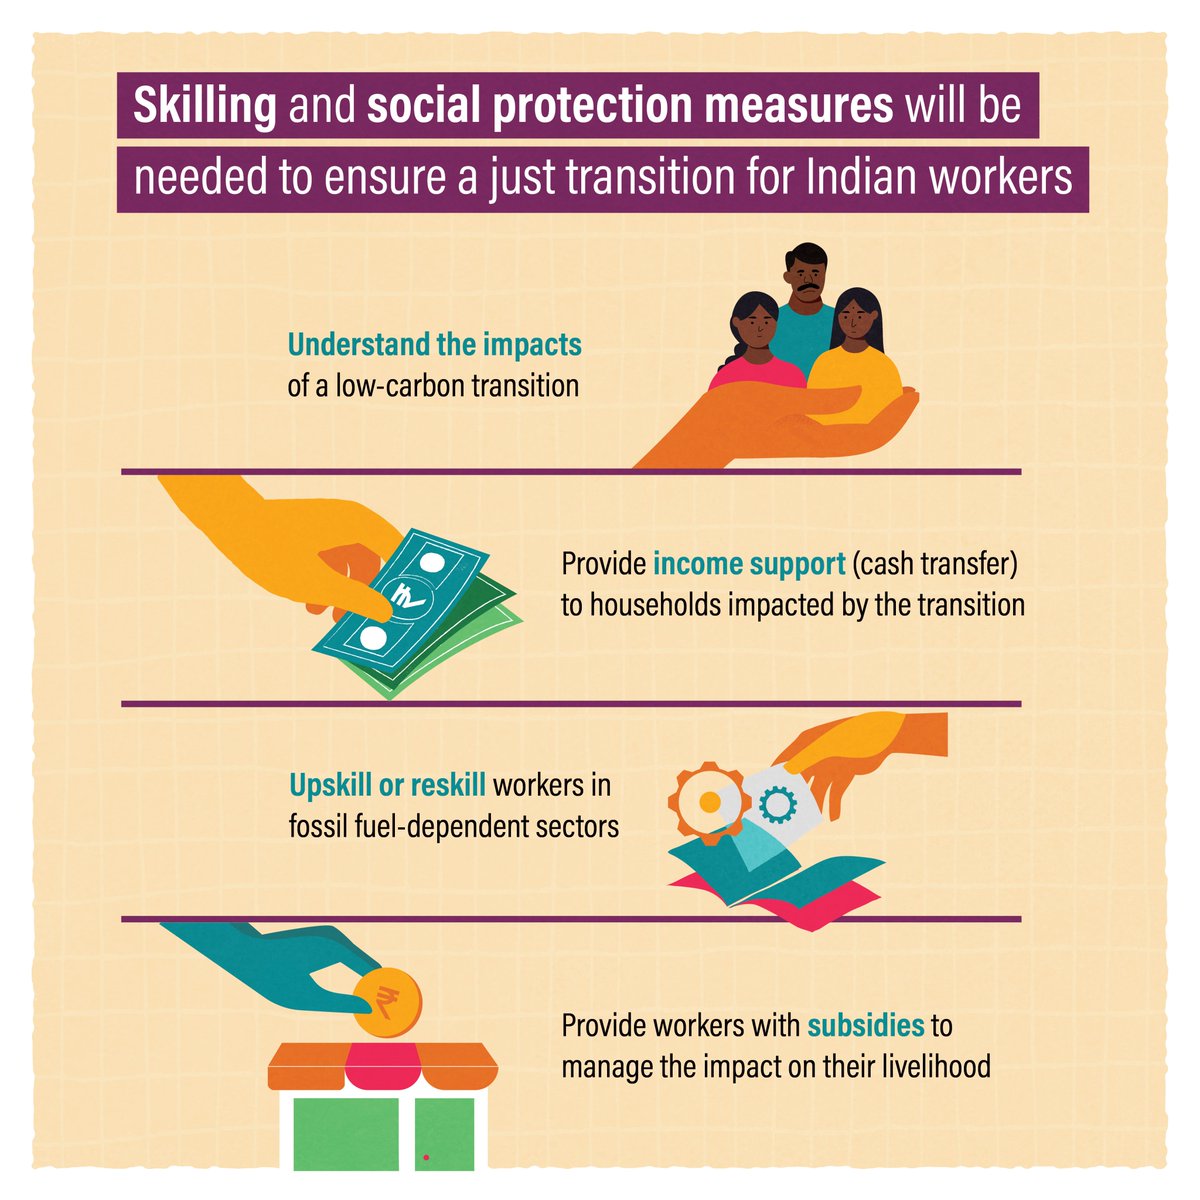 🧐Did You Know? By 2050, India's mining and manufacturing sectors could lose 1 million formal jobs due to the low-carbon transition, making #SocialProtection mechanisms critical for a #JustTransition. To know why social protection is crucial as India decarbonizes, see below👇